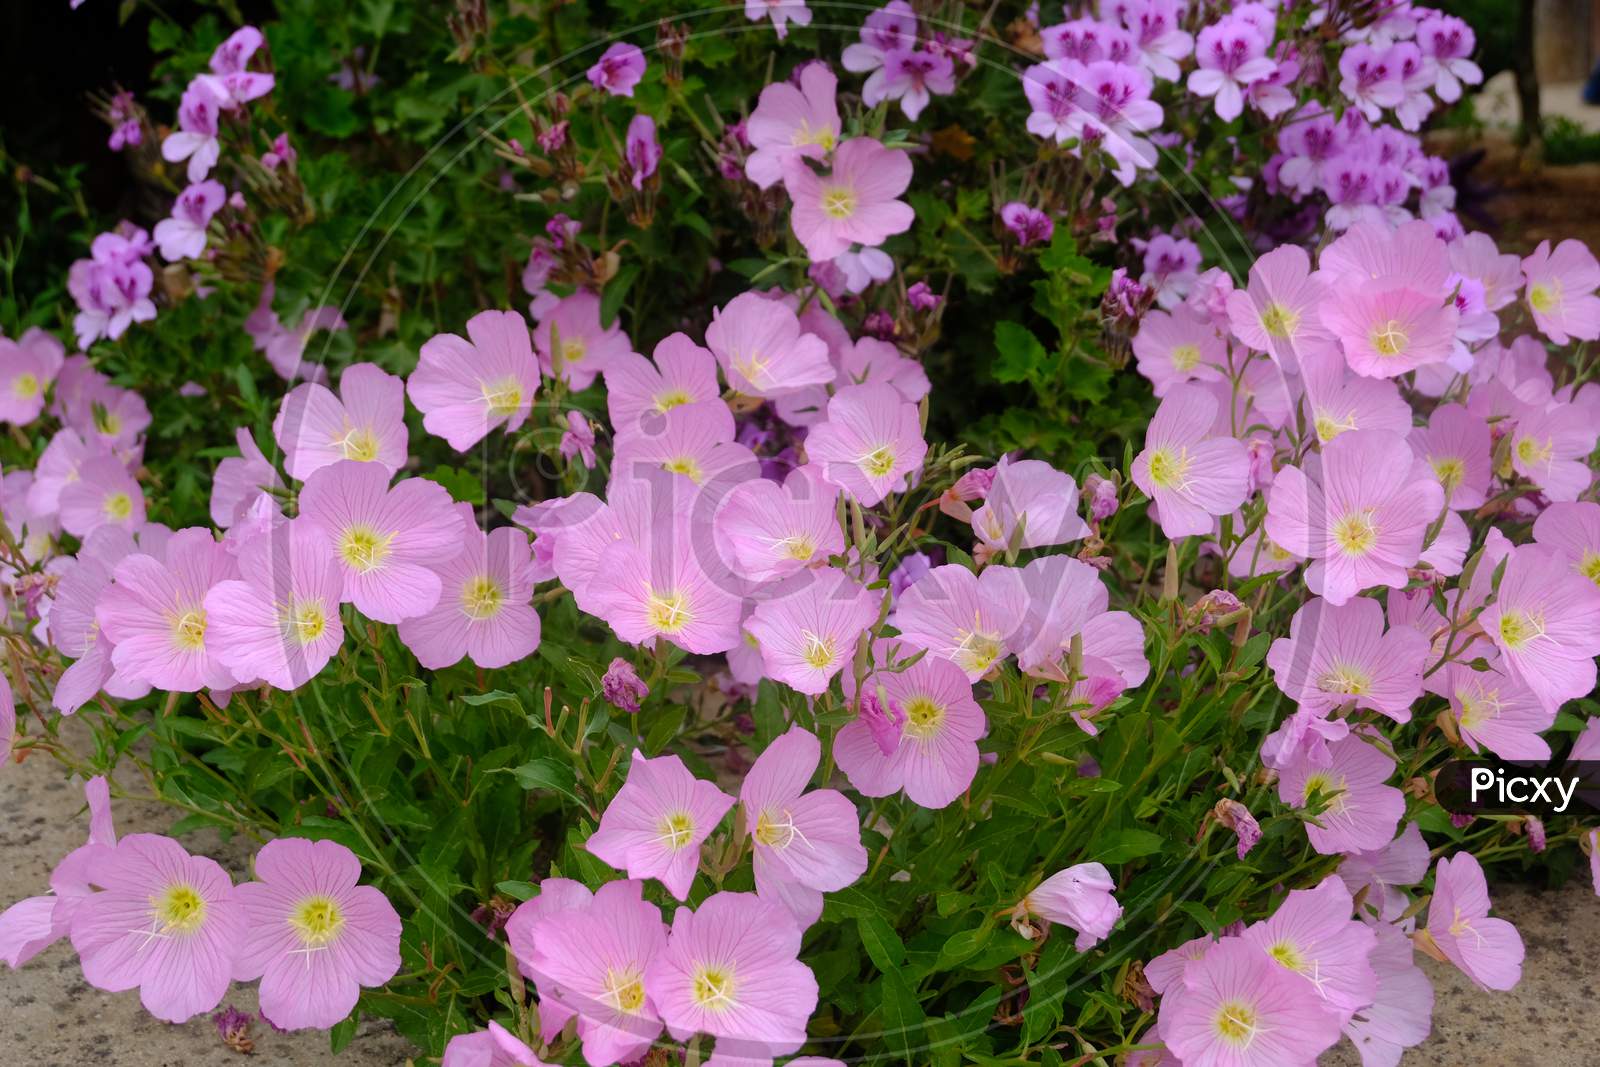 Bunch of pink summer flowers